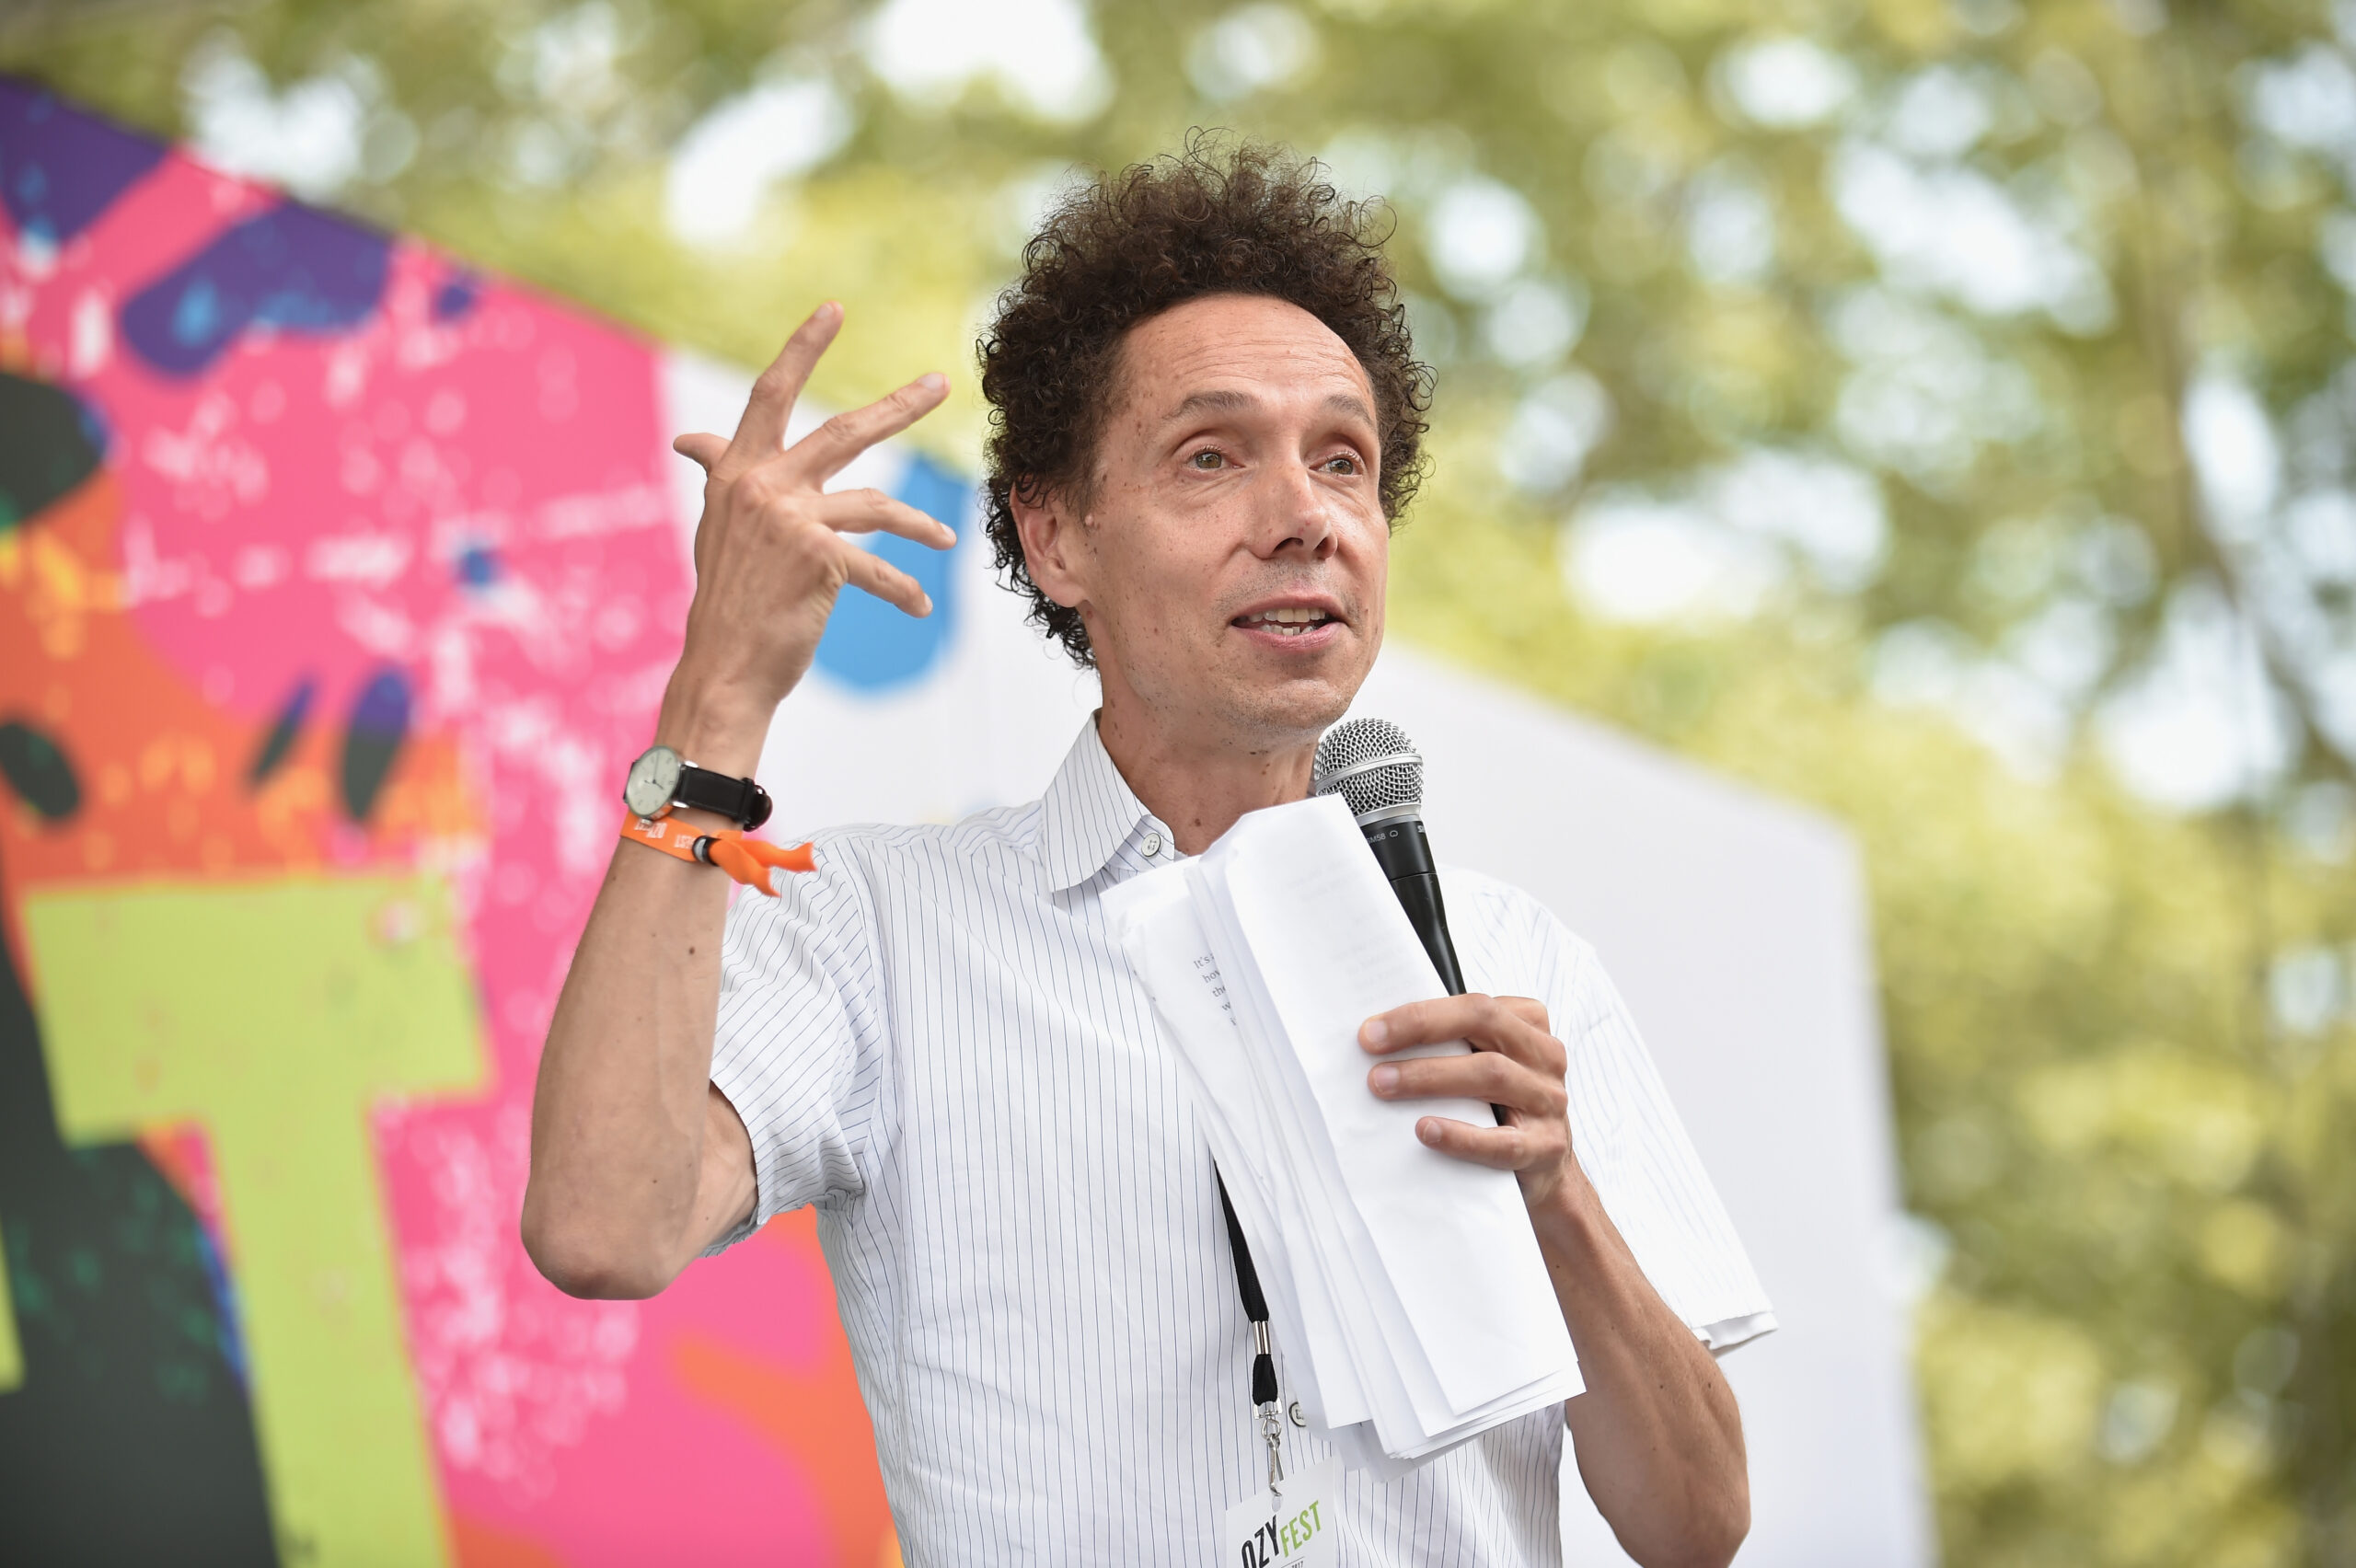 Malcolm Gladwell Railed Against Working From Home and People Are Not Happy About it